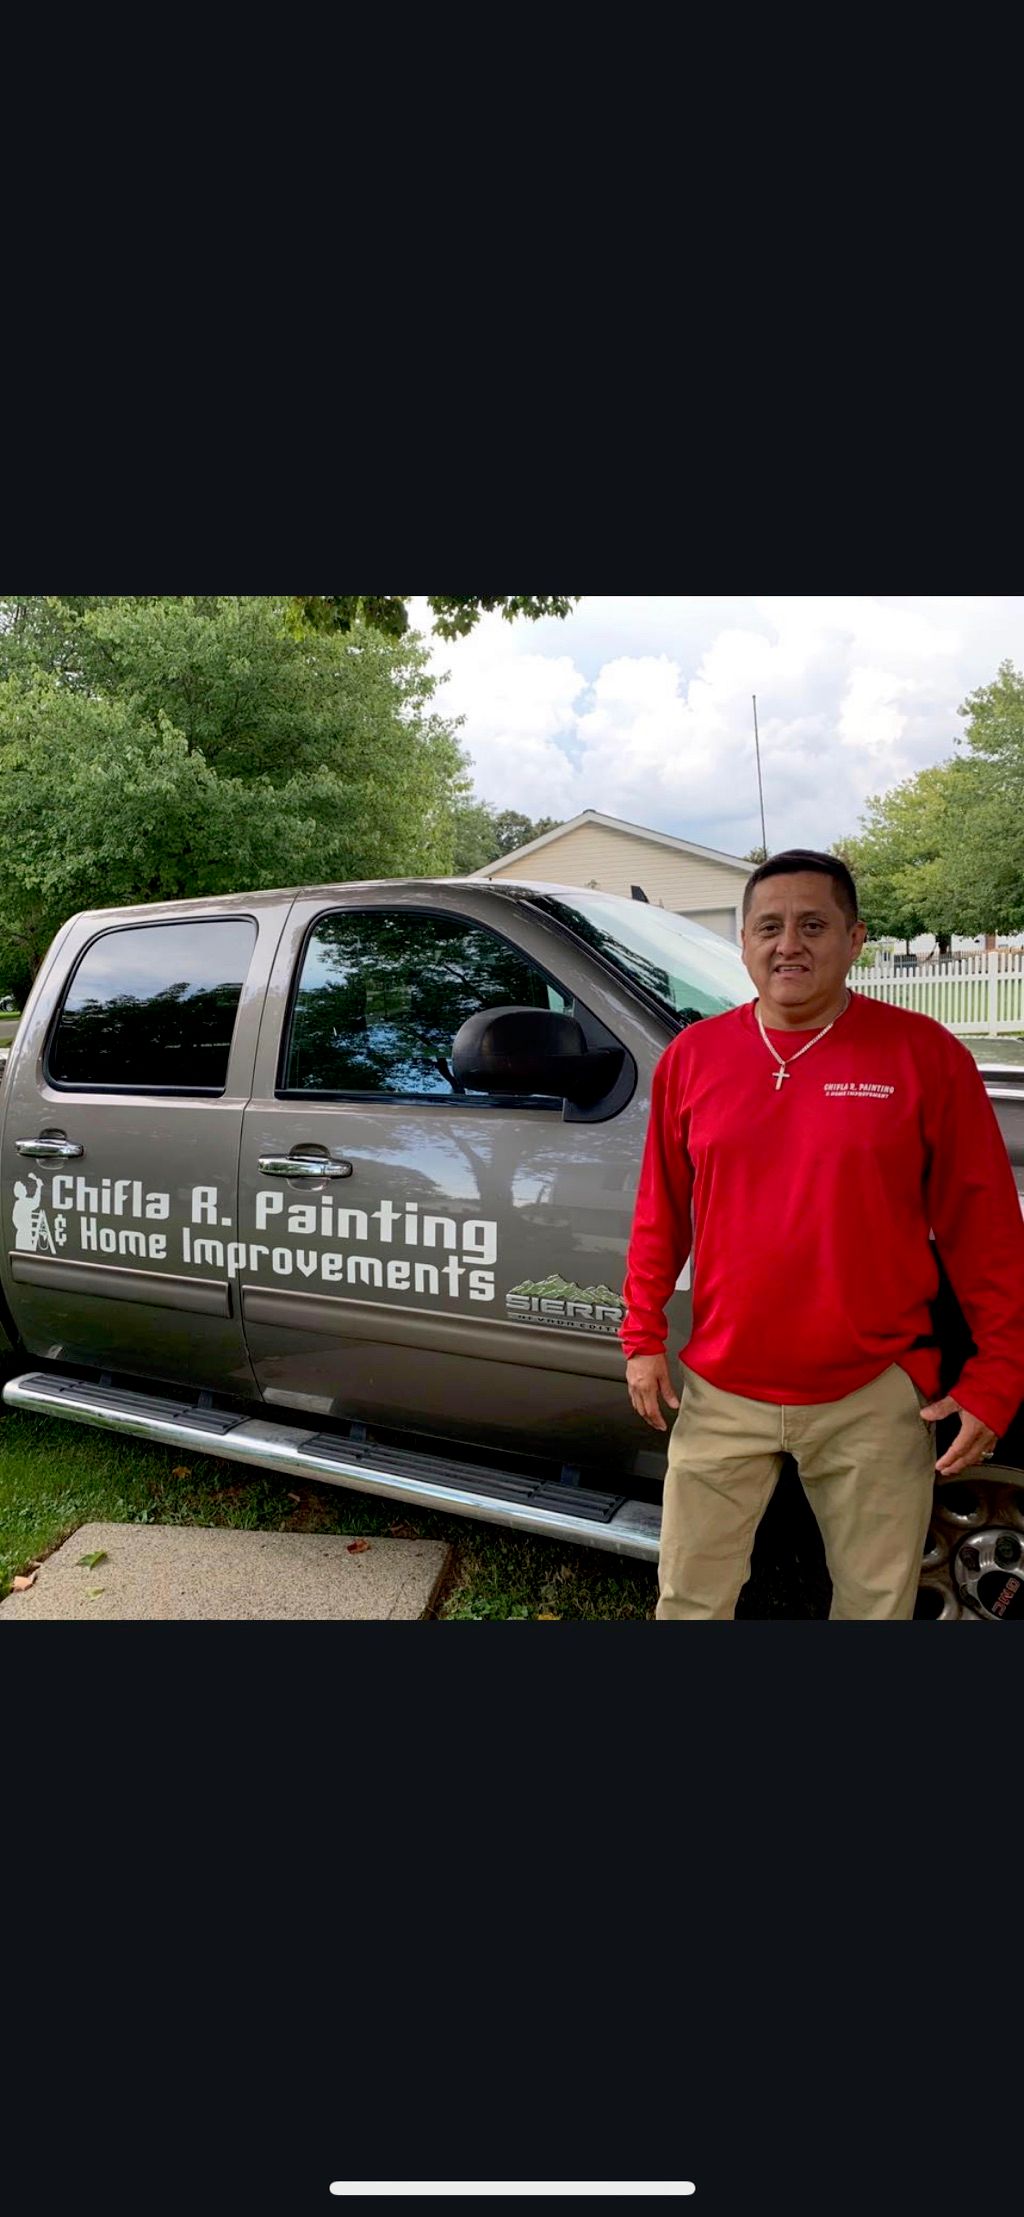 Chifla R Painting and Home Improvements